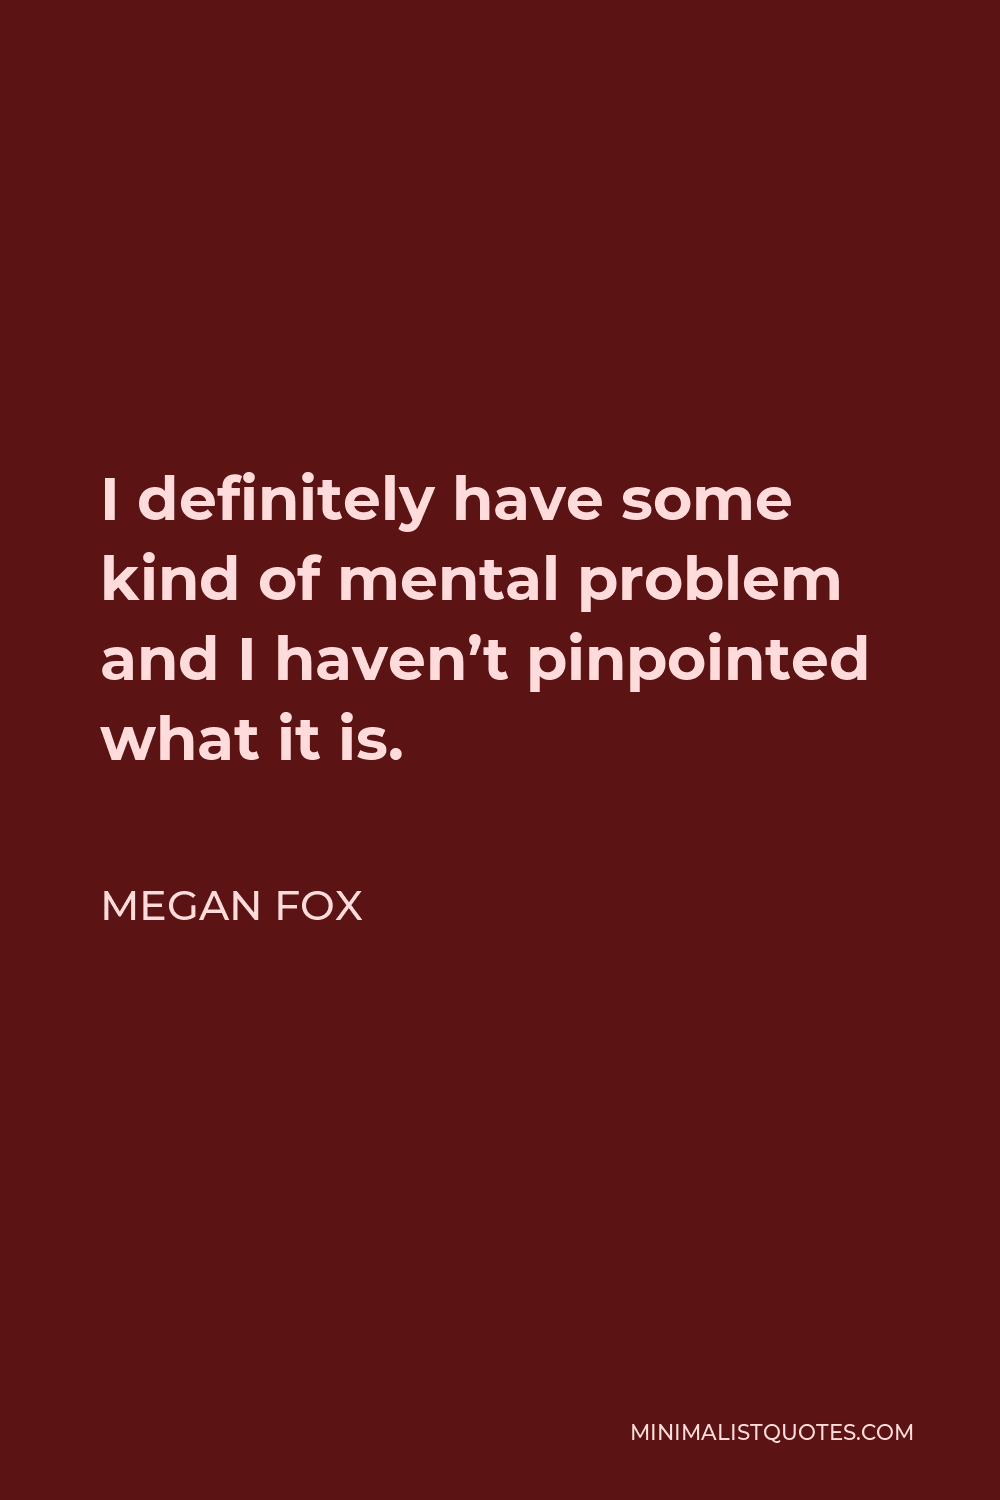 Megan Fox Quote - I definitely have some kind of mental problem and I haven’t pinpointed what it is.